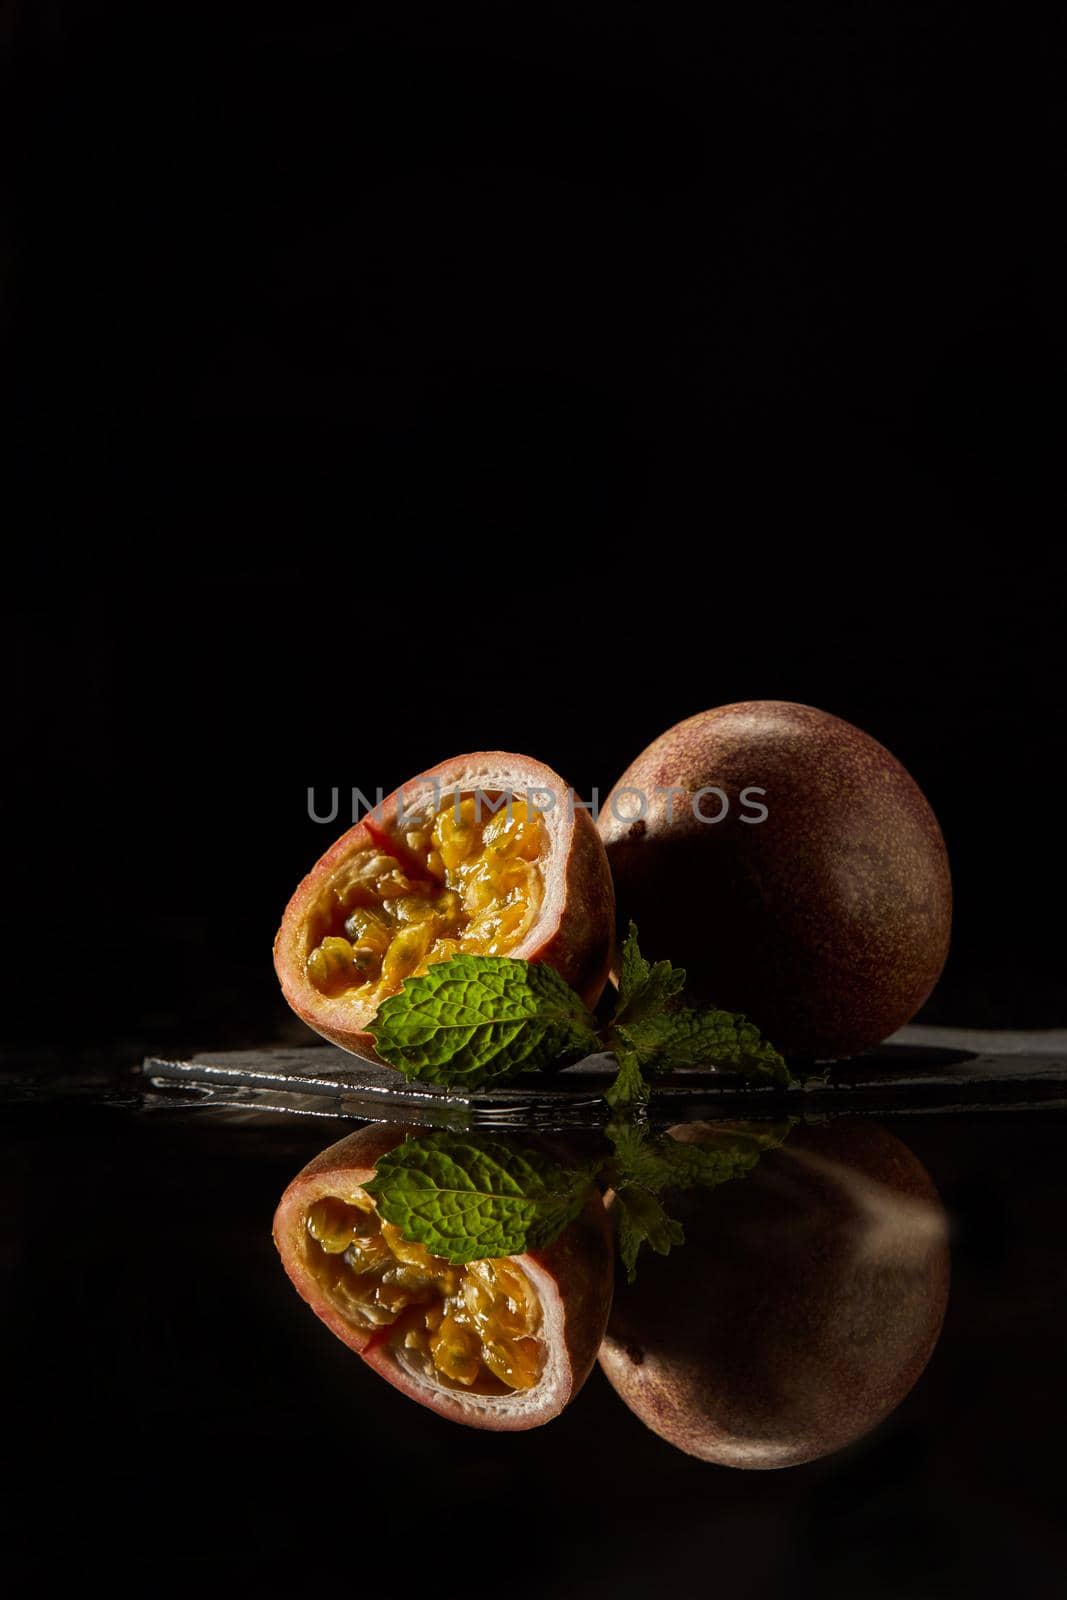 Passion fruit sliced on dark background with reflection. Vertical photo